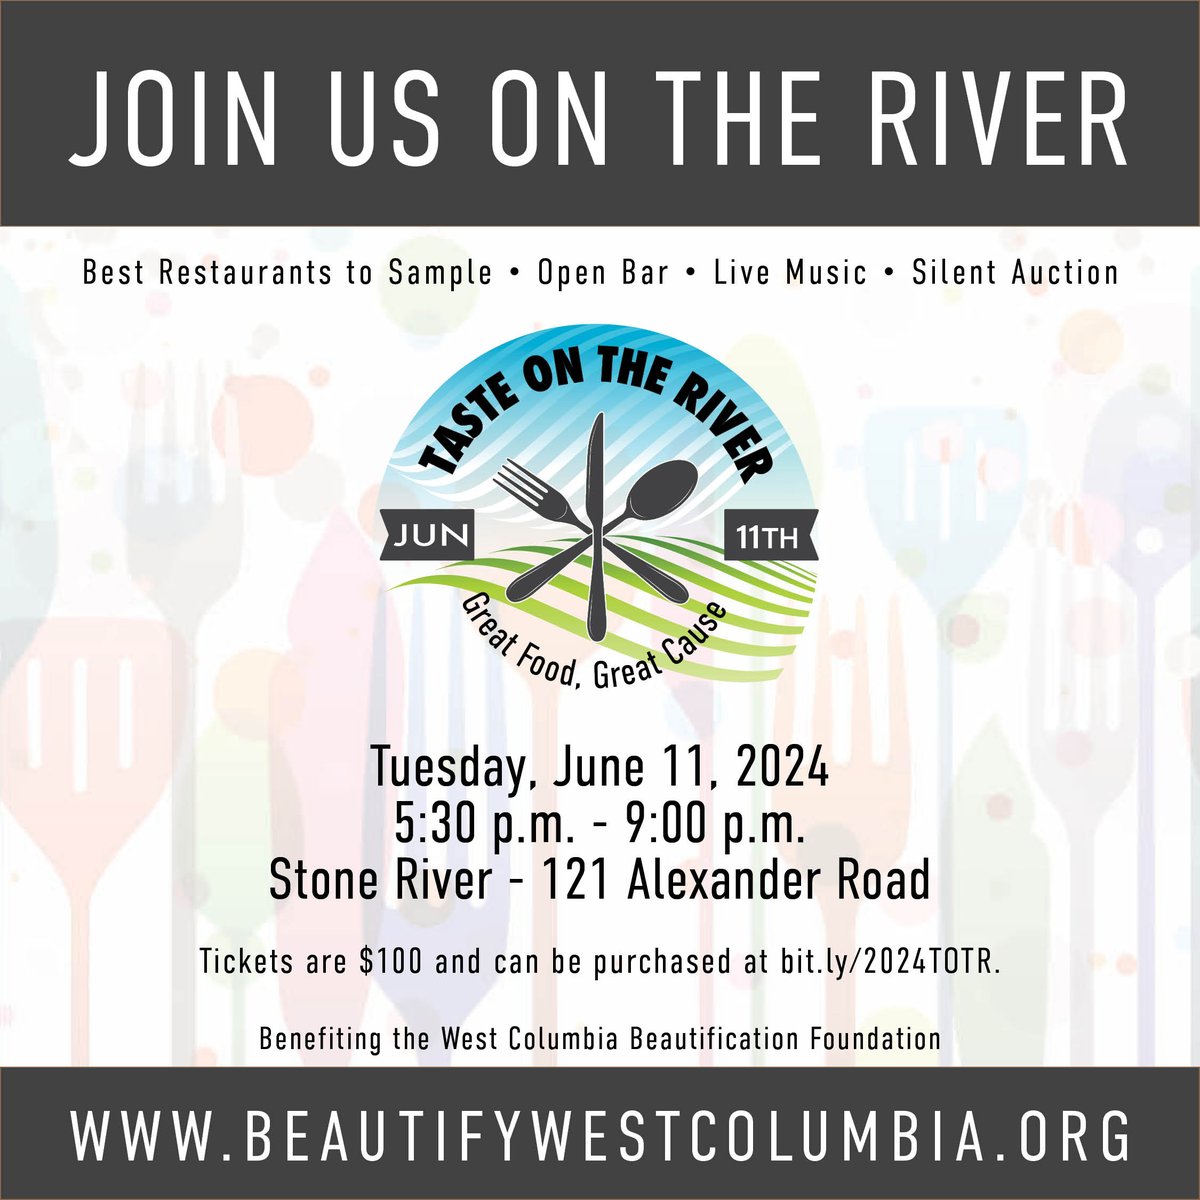 The 8th Annual Taste on the River is back on Tuesday, June 11, at Stone River from 5:30 p.m. - 9:00 p.m.! All proceeds go towards making our city even more beautiful. 🌻 Get your tickets here: bit.ly/2024TOTR #WeCoSC #HeadWest #WeCommunity #TasteOnTheRiver